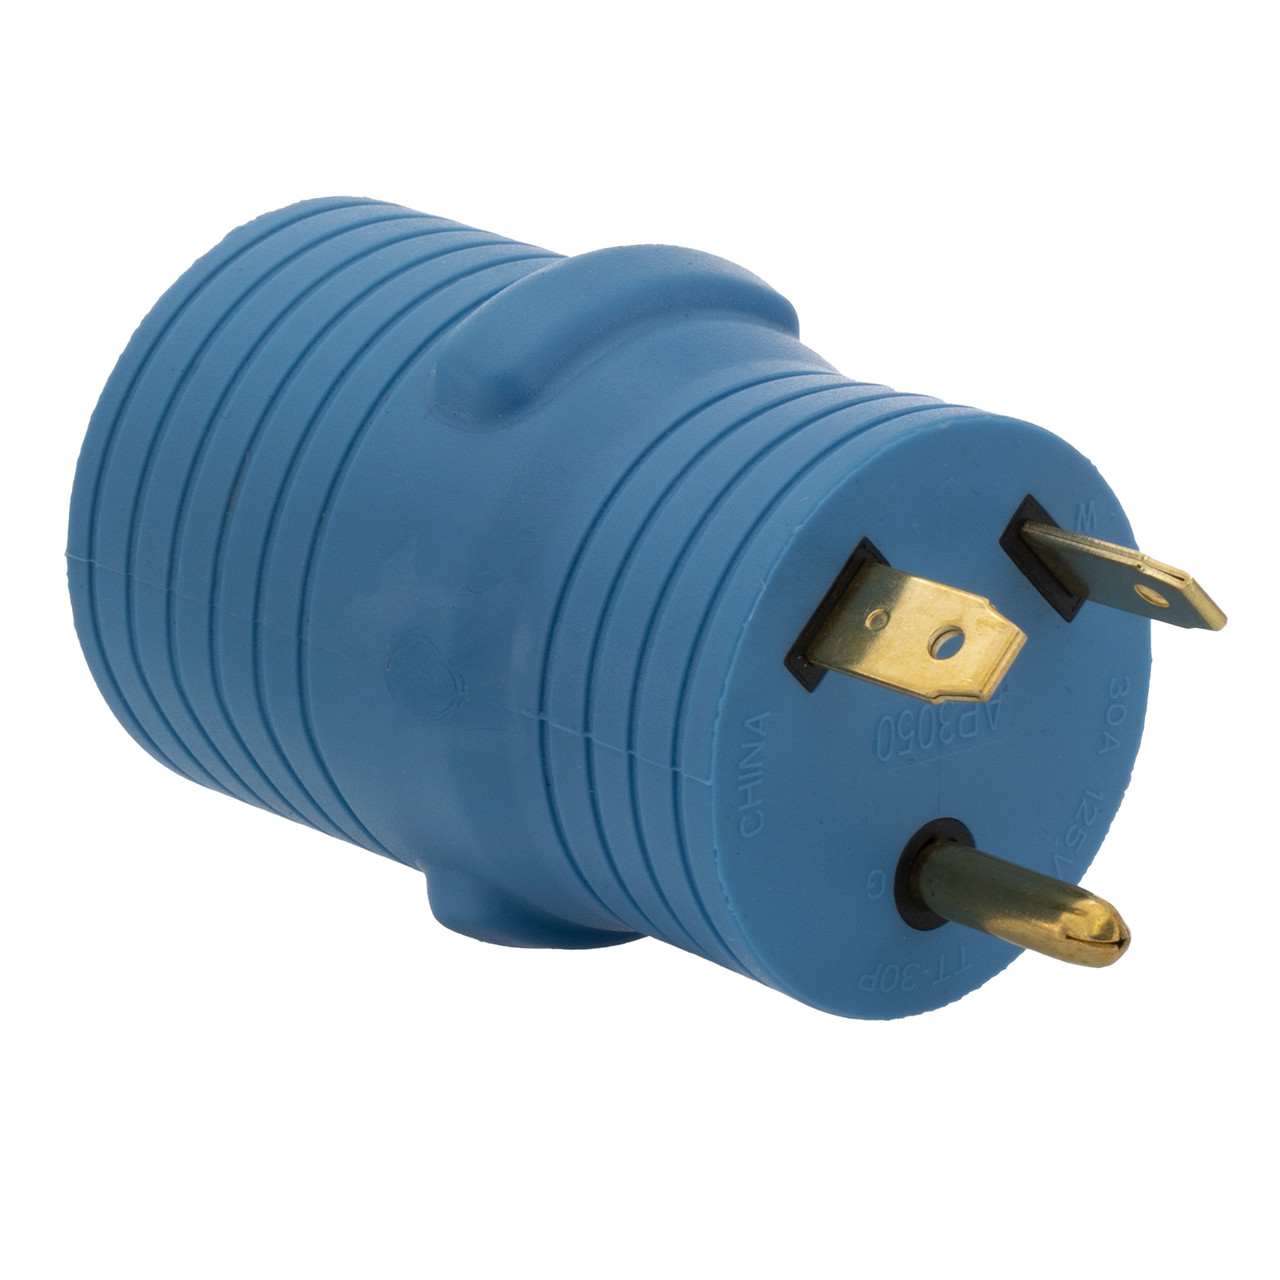 30 Amp RV Plug to 50 Amp Adapter - RecPro